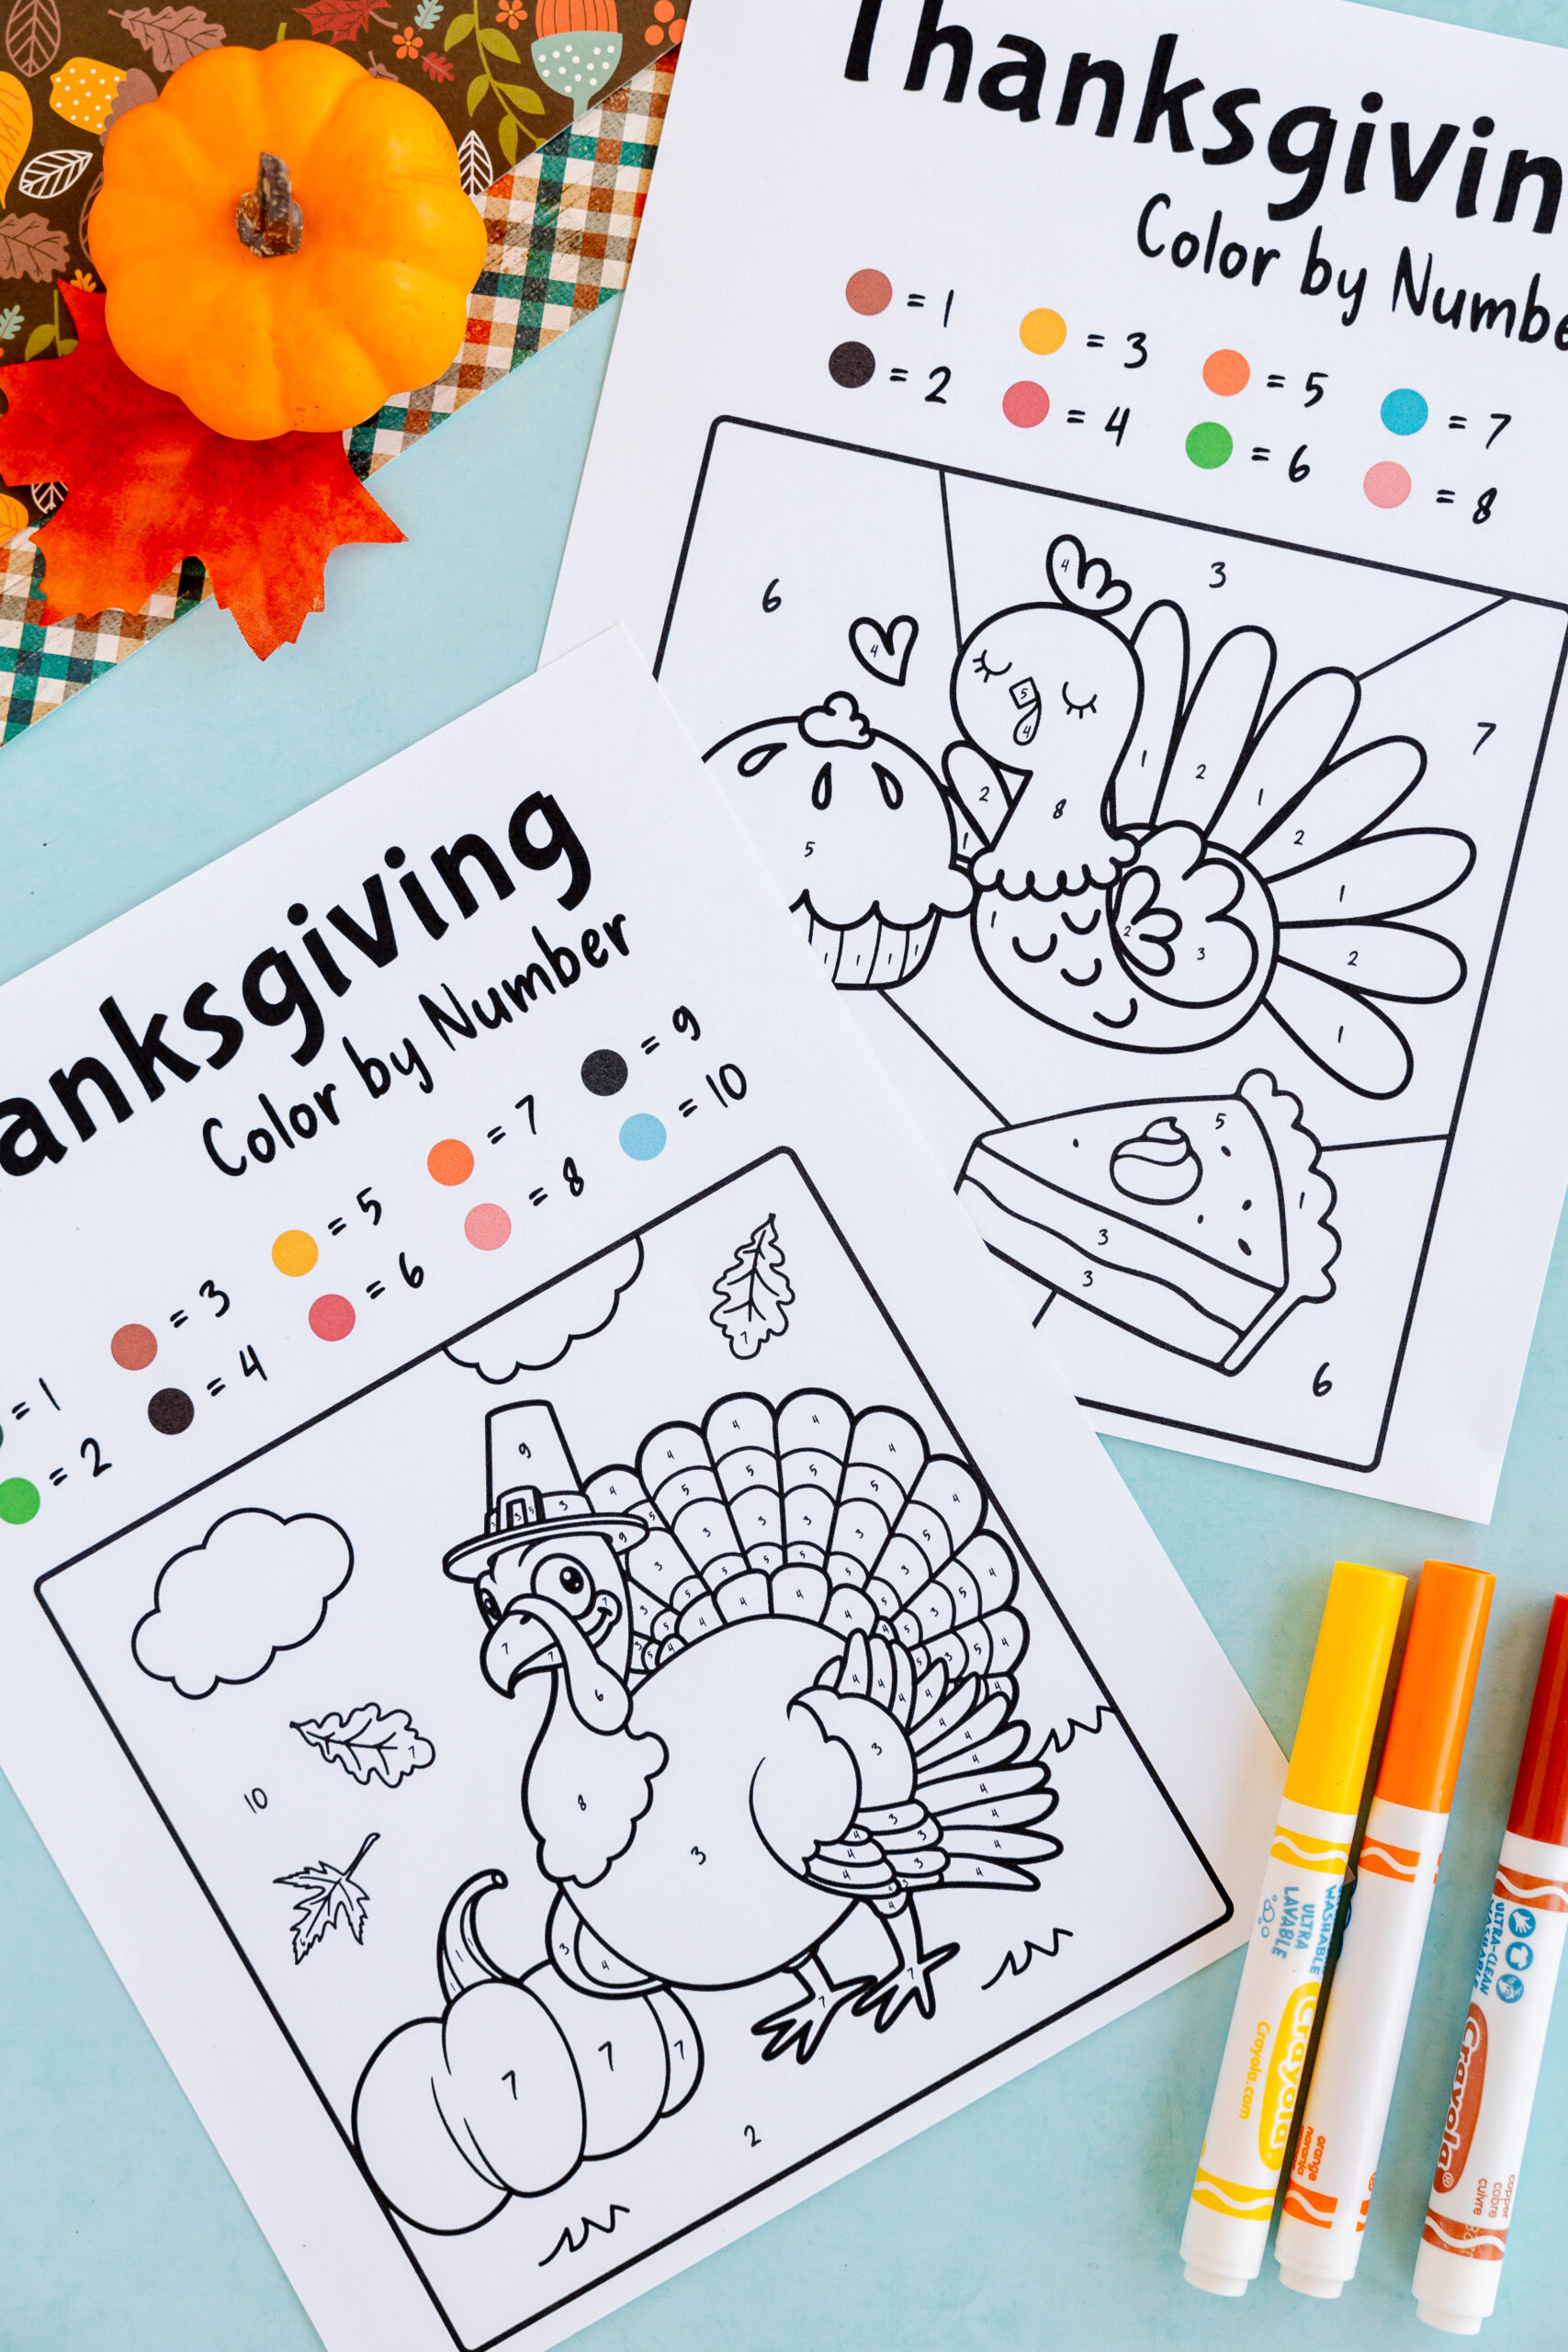 https://www.playpartyplan.com/wp-content/uploads/2023/11/Thanksgiving-Color-by-Number-1-scaled.jpg